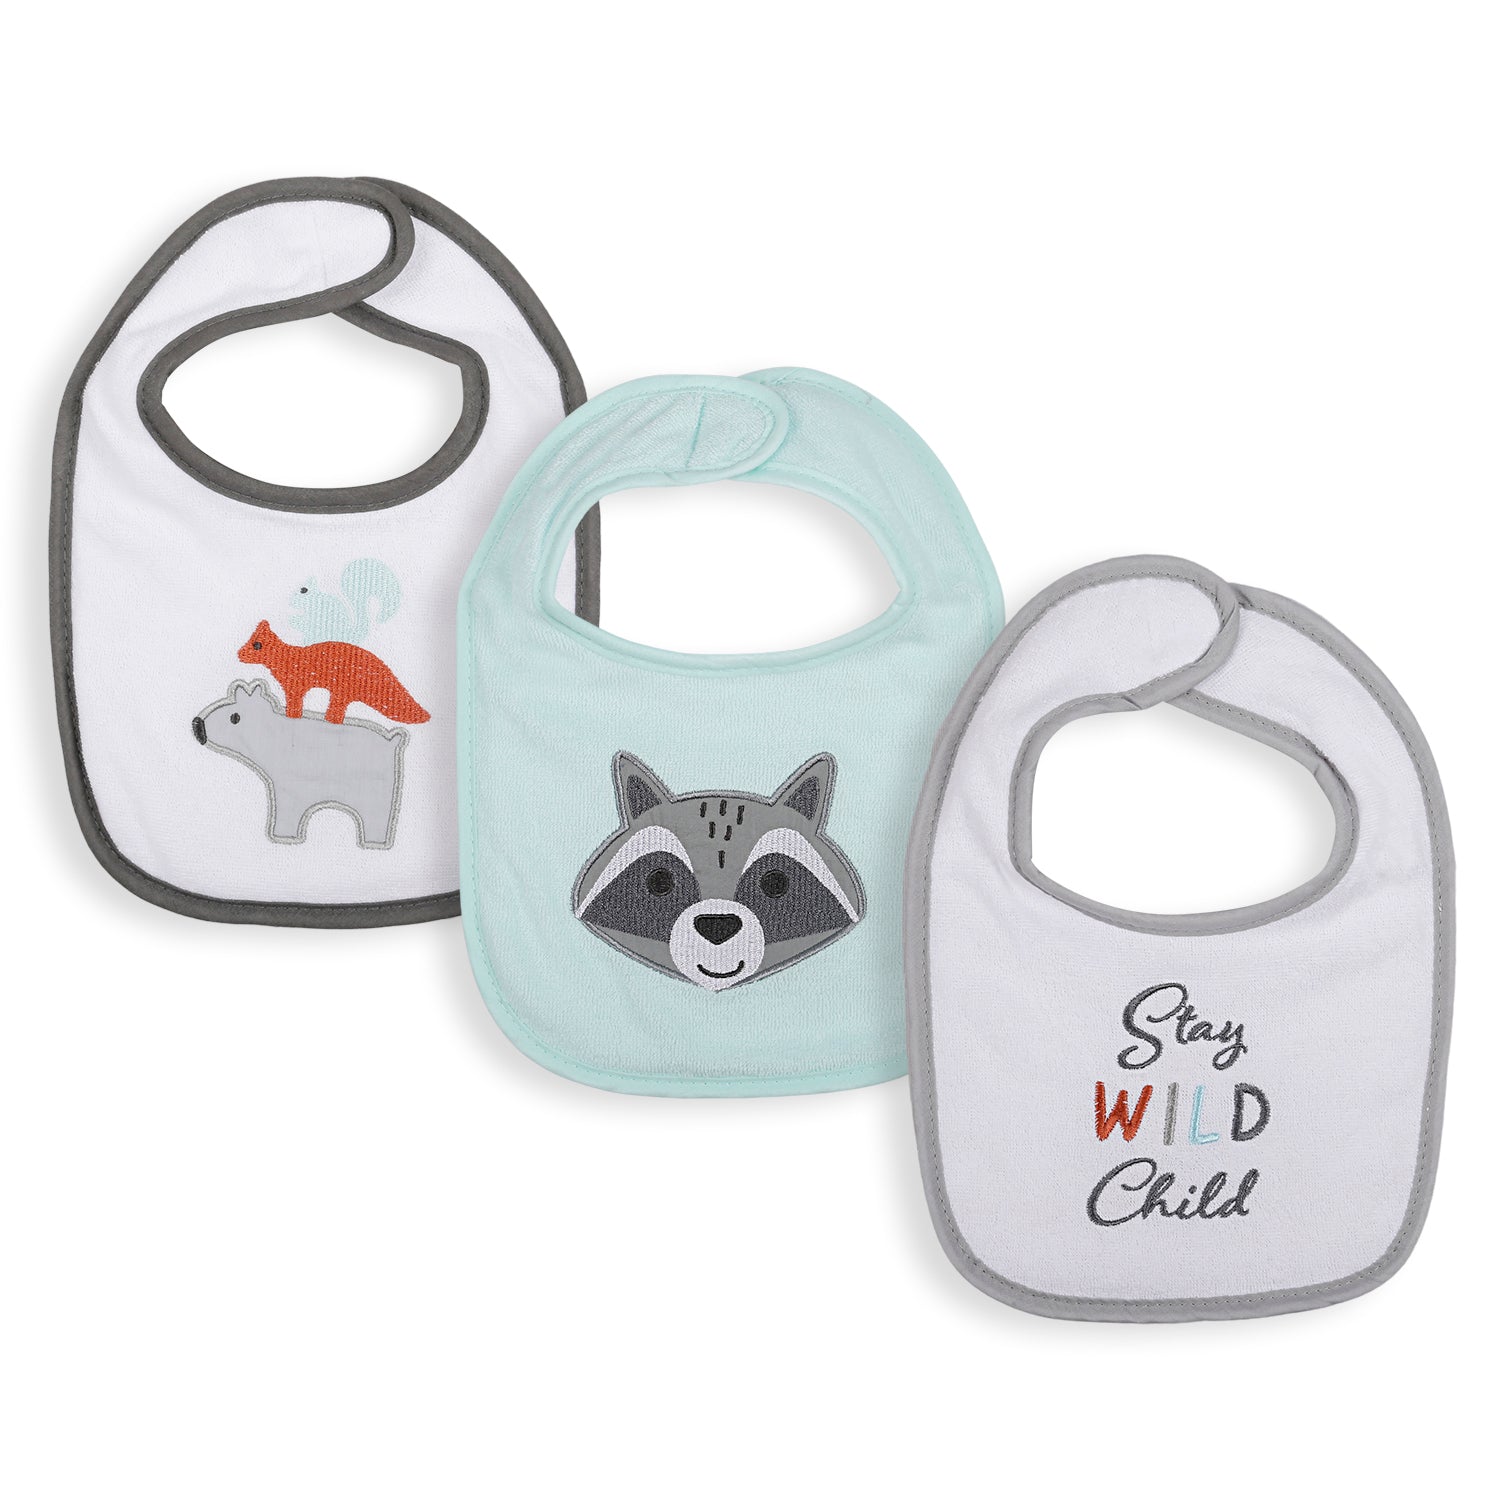 Feeding Bibs Pack Of 3 Wild Child White And Mint Green